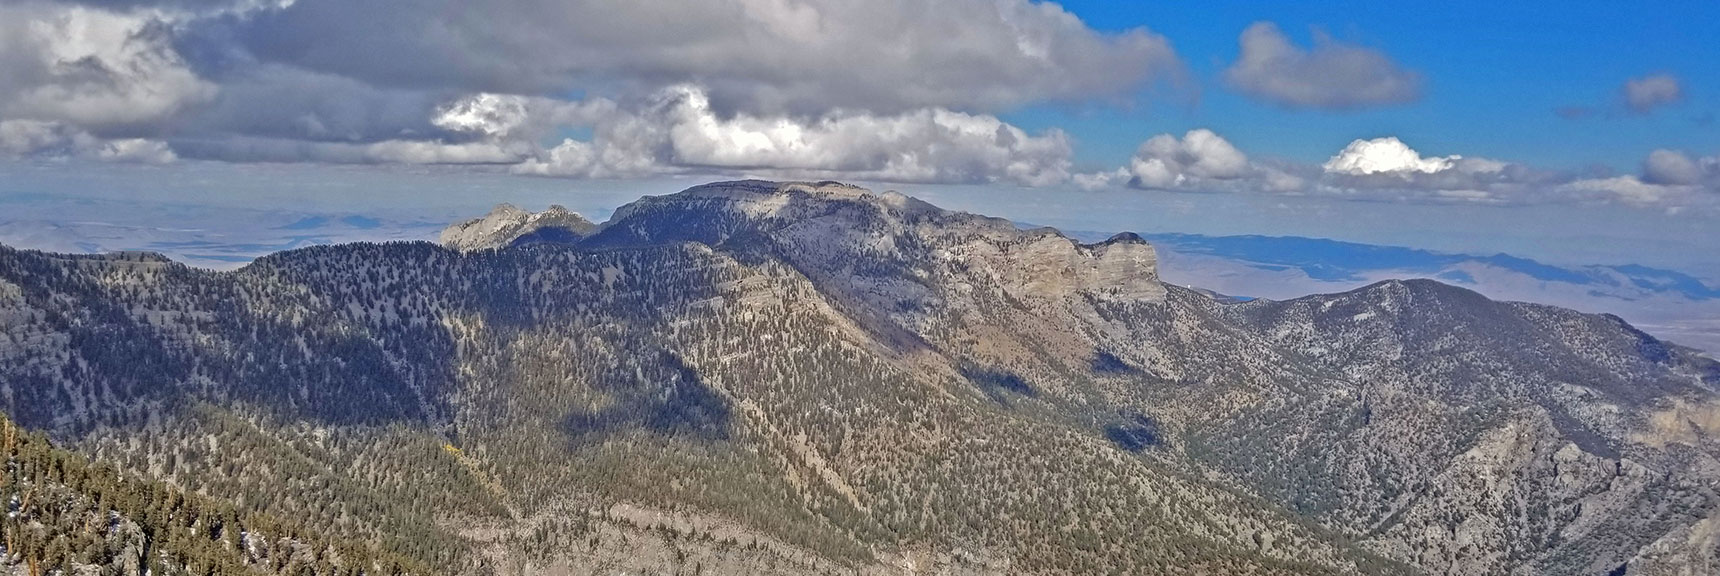 Clouds Totally Lifting Over Mummy Mountain | Charleston Peak Loop October Snow Dusting | Mt. Charleston Wilderness | Spring Mountains, Nevada